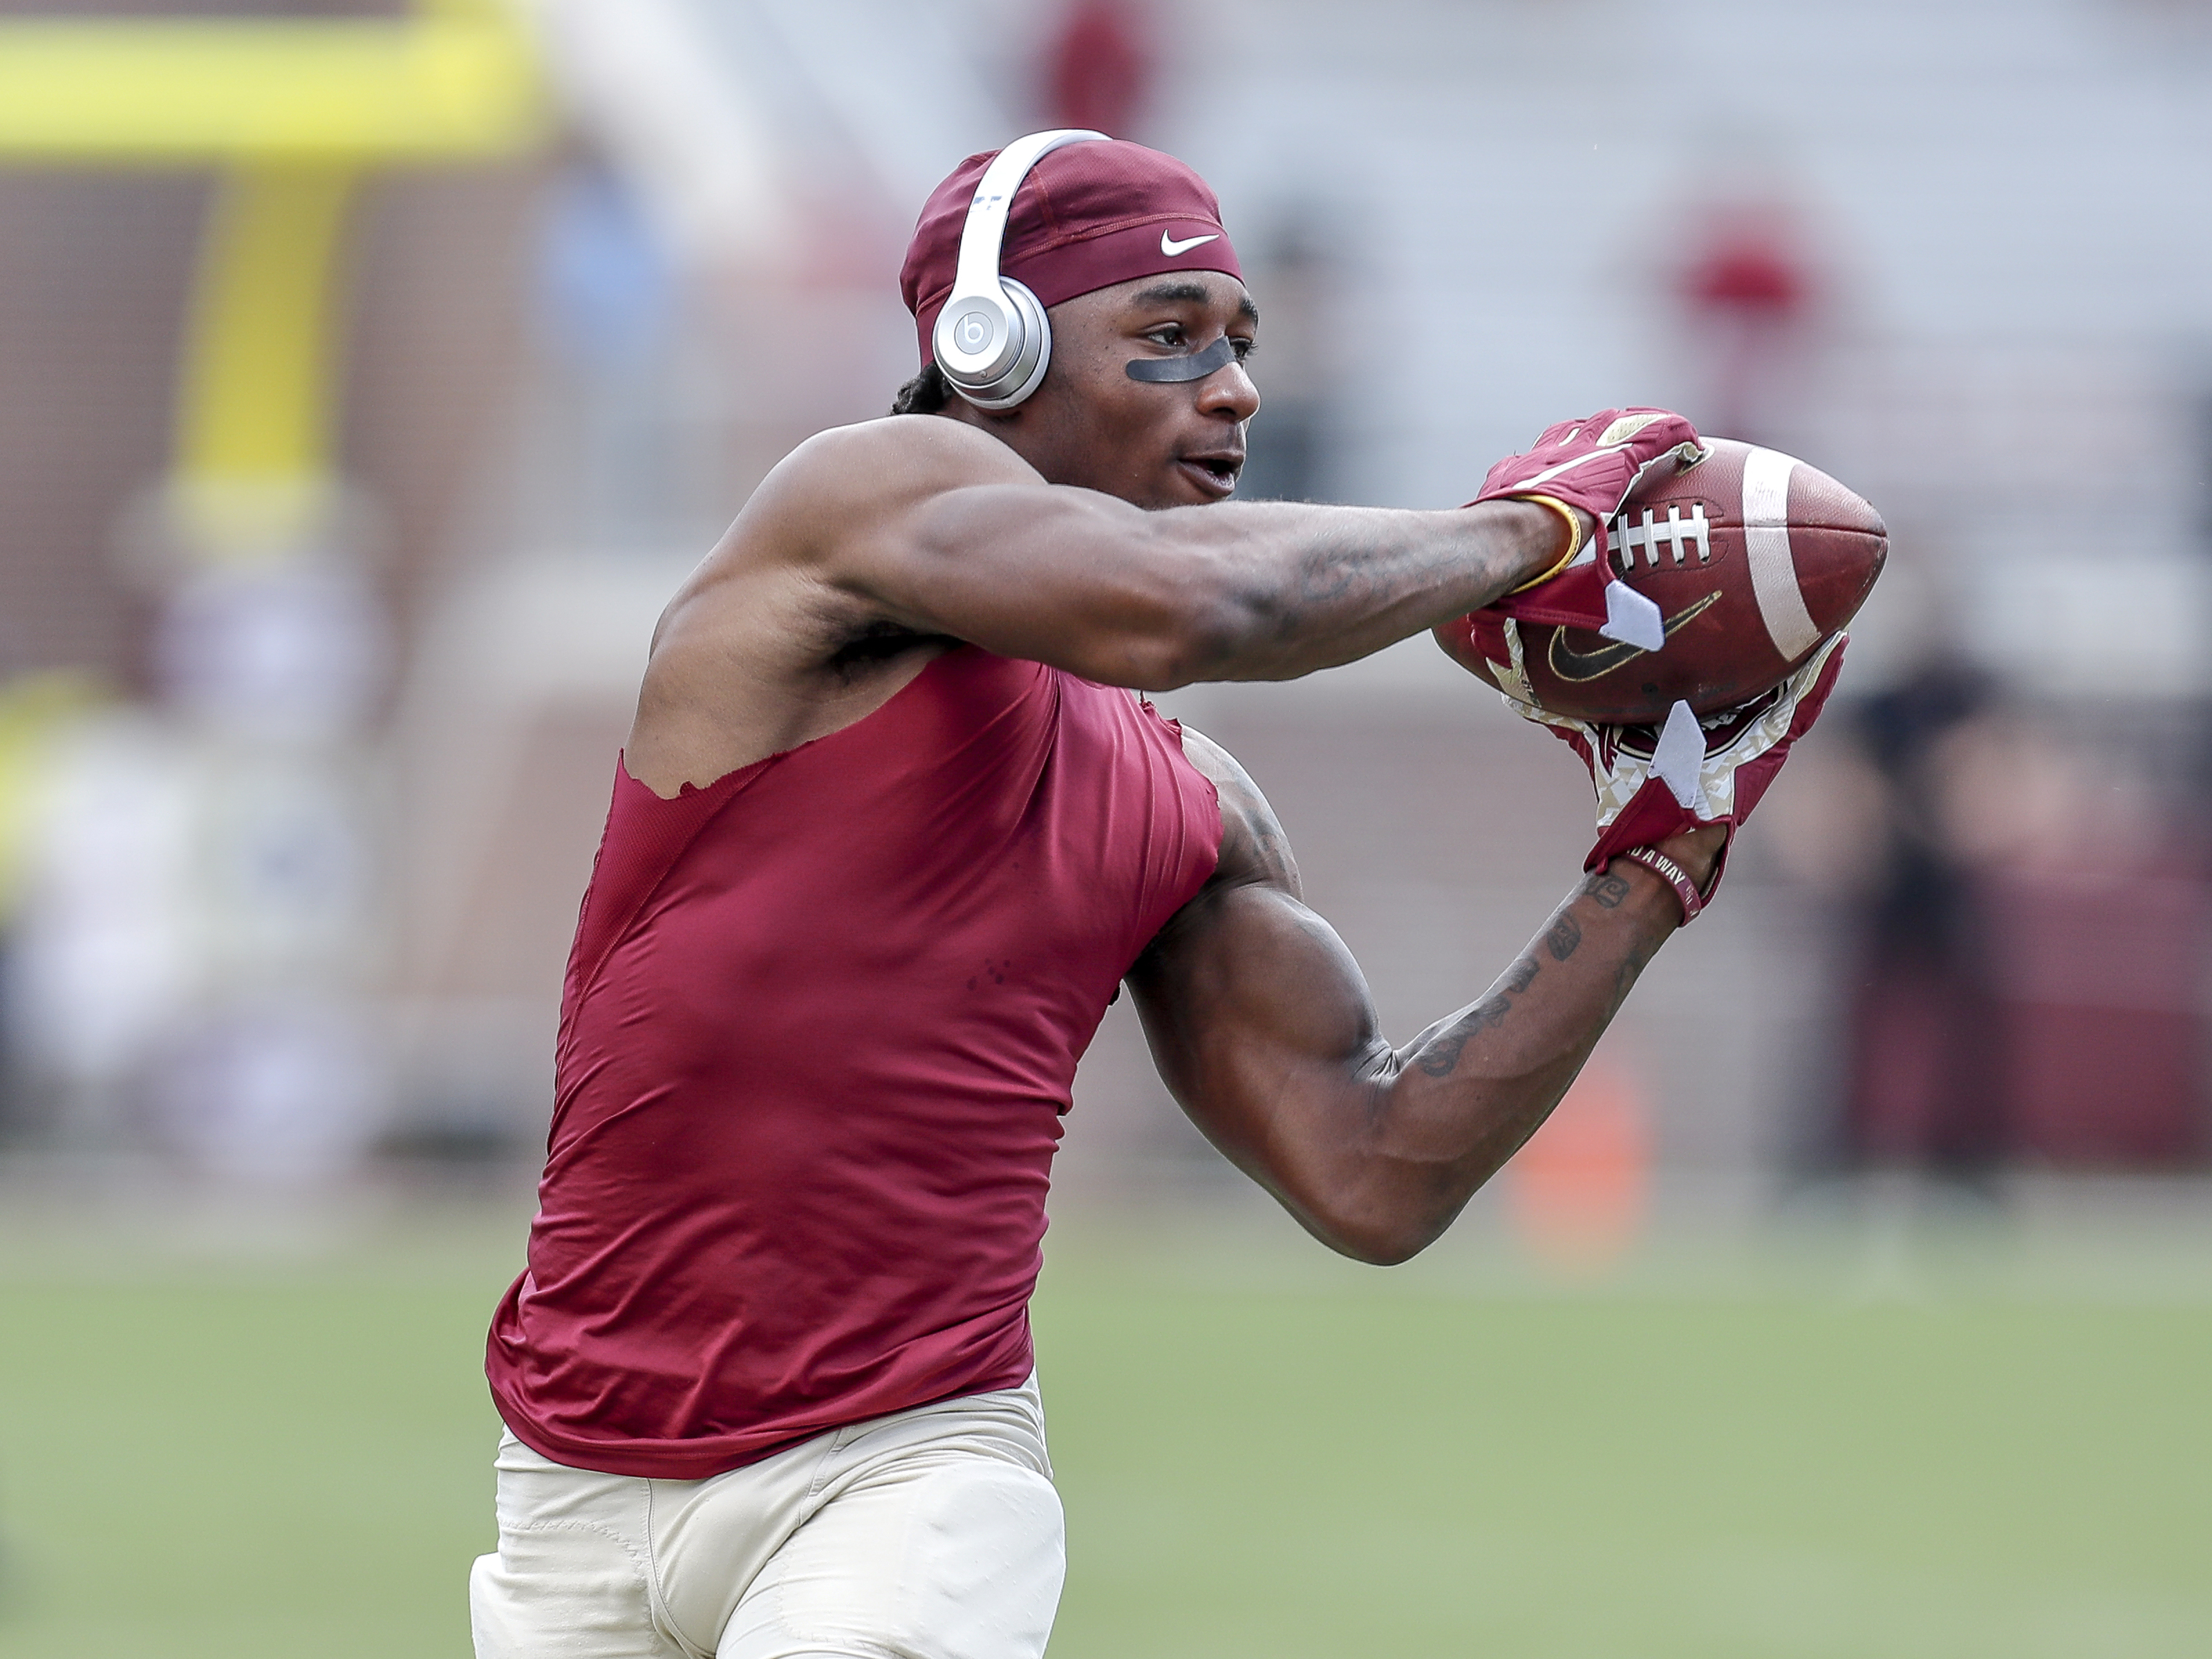 NFL Draft: Could Asante Samuel Jr. sneak into the first round?